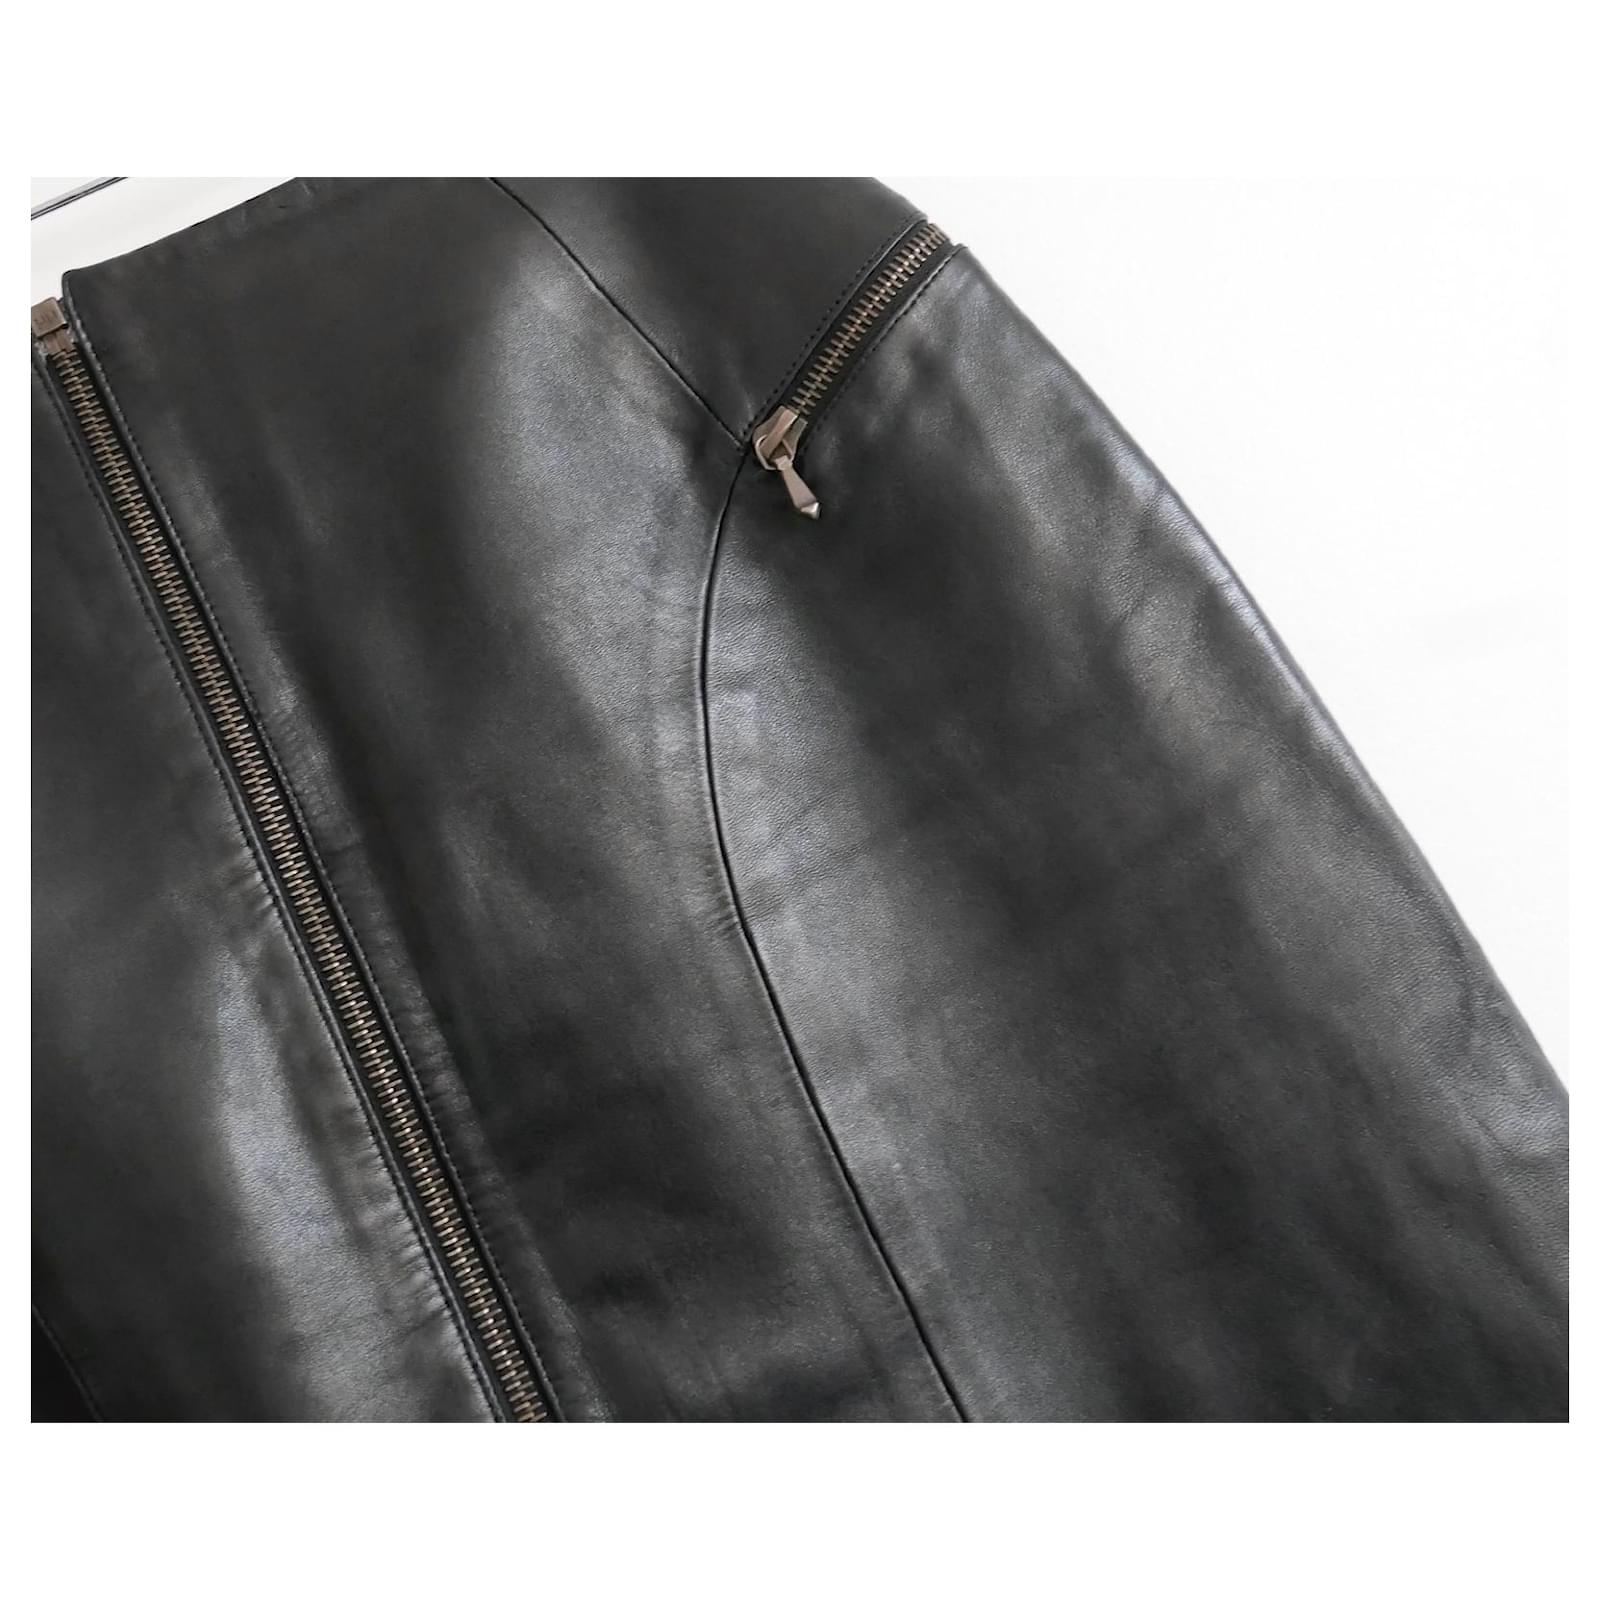 Fabulous, rare Christian Dior vintage leather skirt from the Fall 2000 collection (look 4 on the runway). Worn once. 
Made from super soft, smooth black lamb leather with a black silk lining and antique look matte gold hardware. It has a tapering